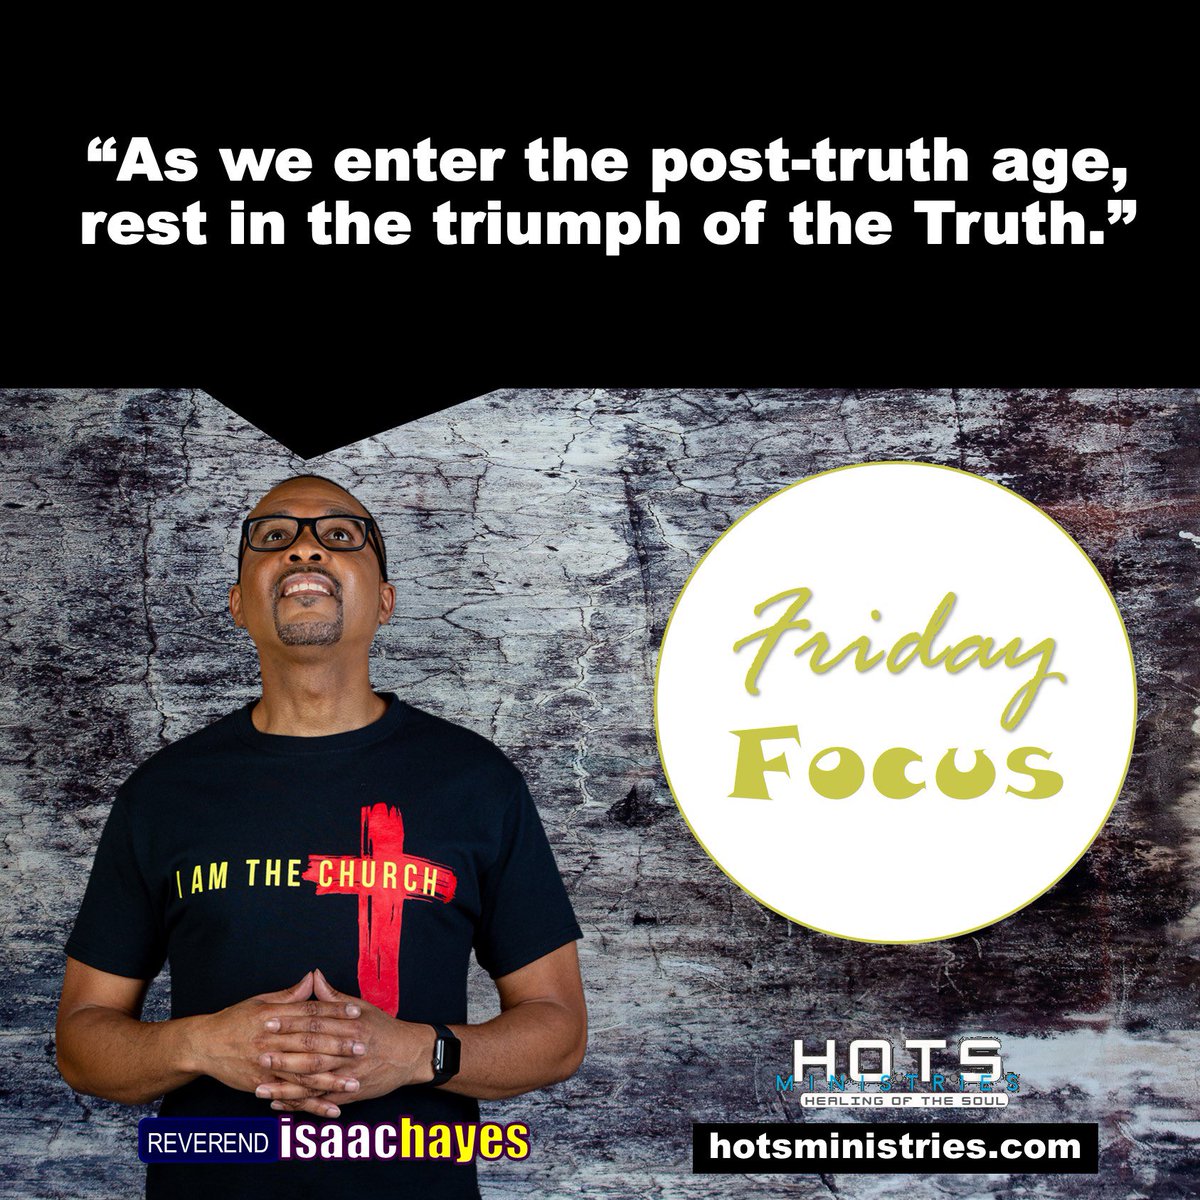 How are you resting in the truth of the Scriptures? #TriumphOfTruth #MorningManna #HOTSMinistries #FridayFocus #Direction #Disclosure #Deliverance